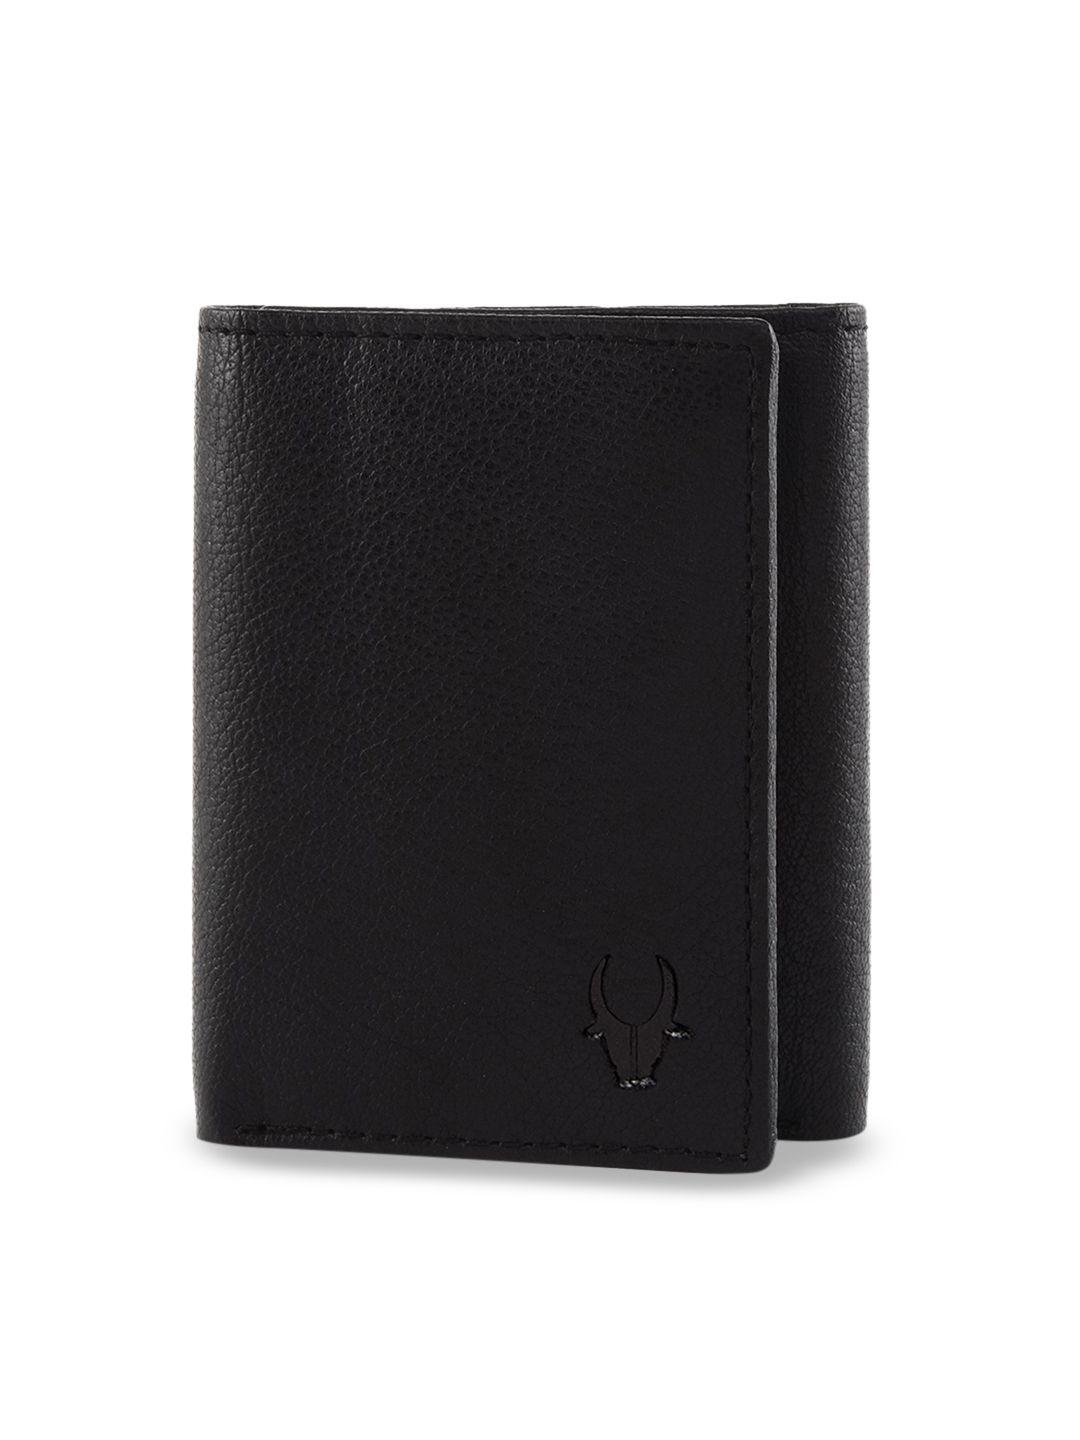 wildhorn men black rfid protected genuine leather hand-stitched solid three fold wallet